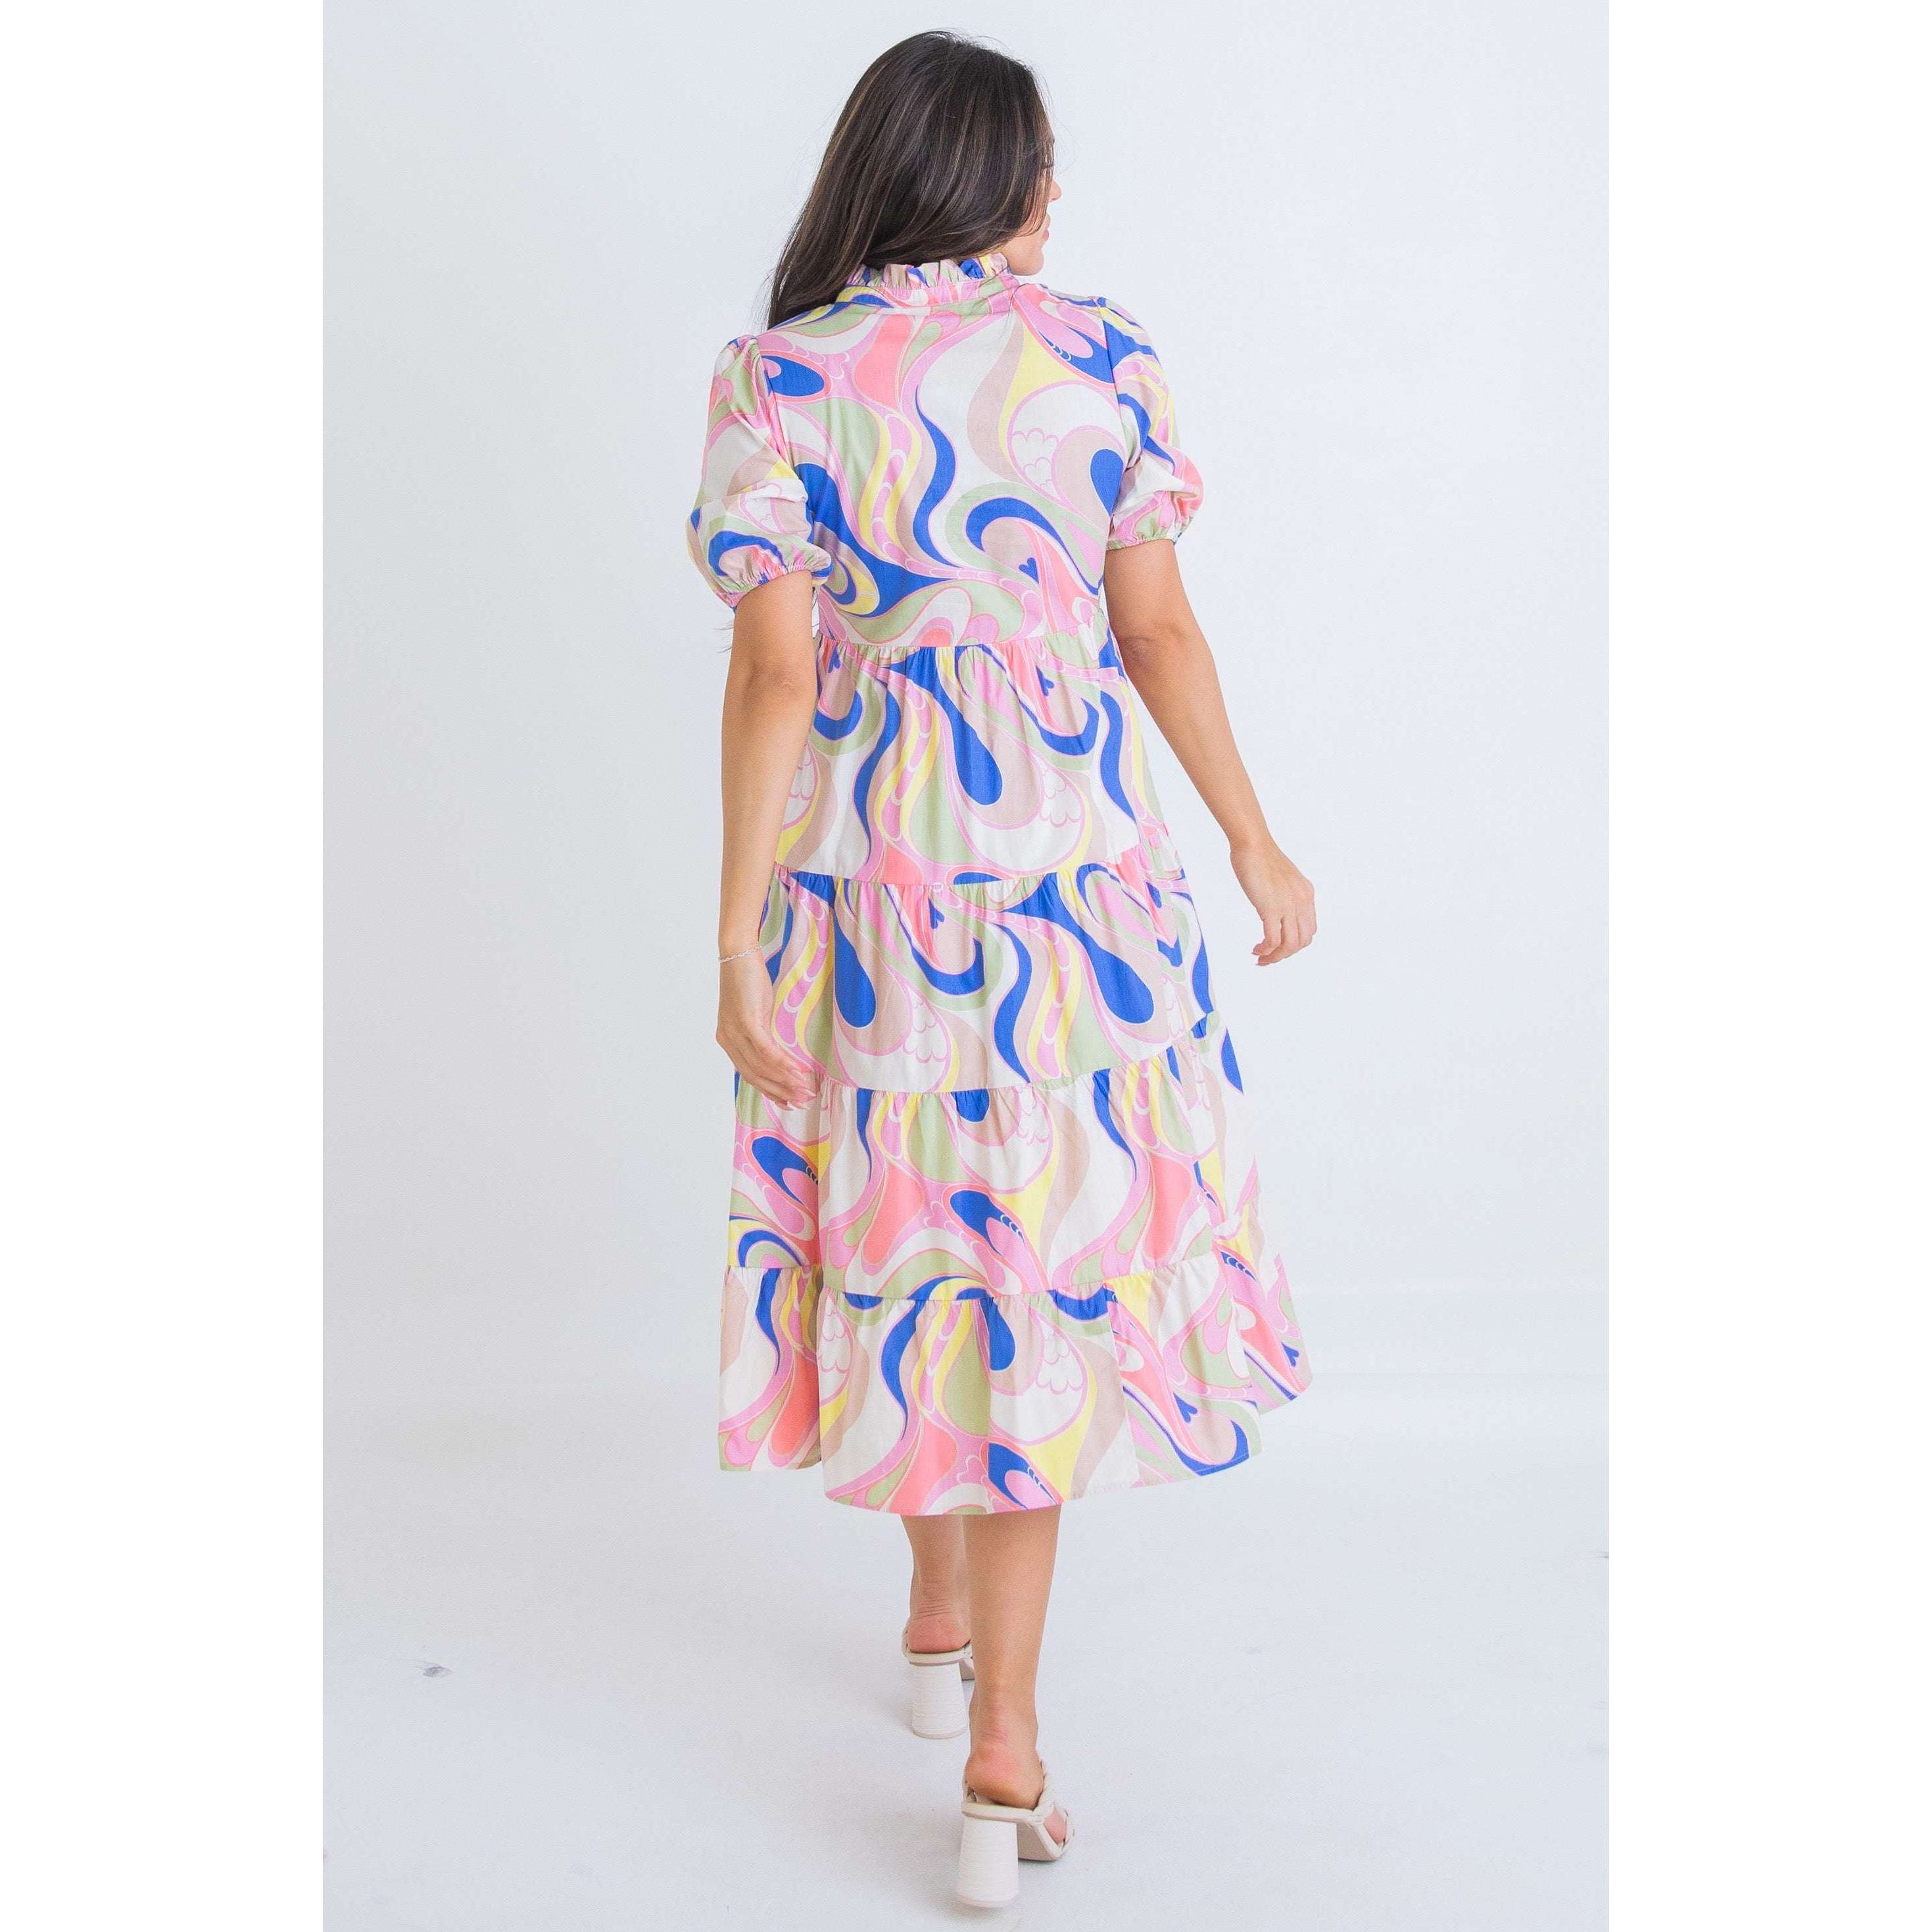 8.28 Boutique:Karlie Clothes,Karlie Clothes Abstract Swirl Tiered Dress,Dress